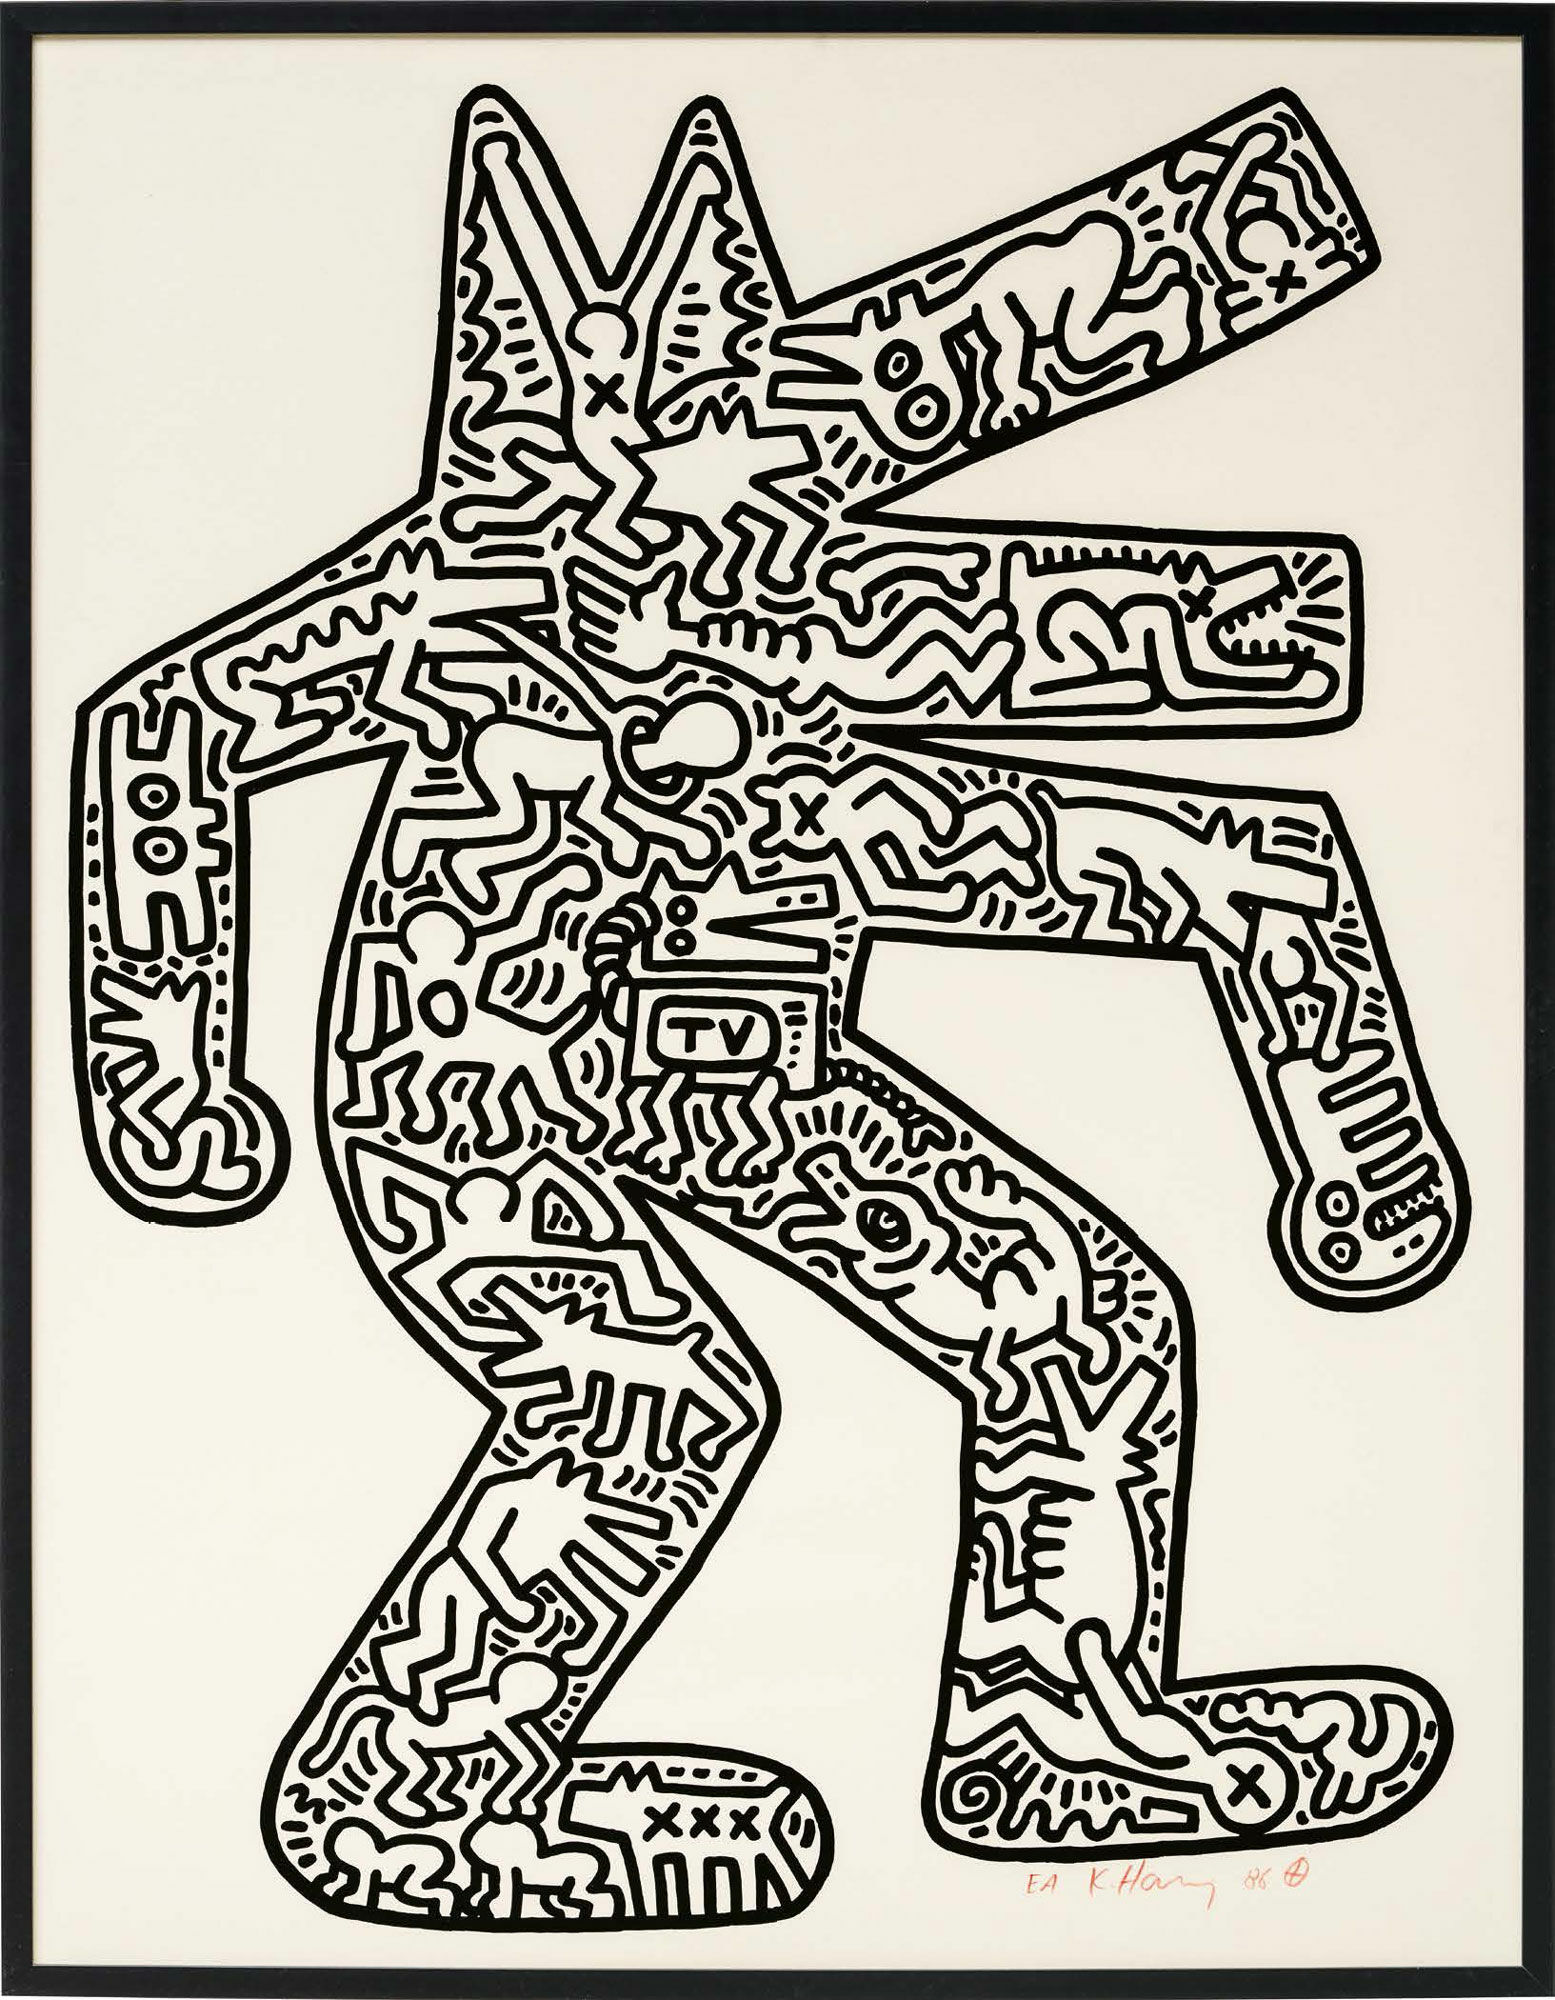 Picture "Dog" (1986) by Keith Haring